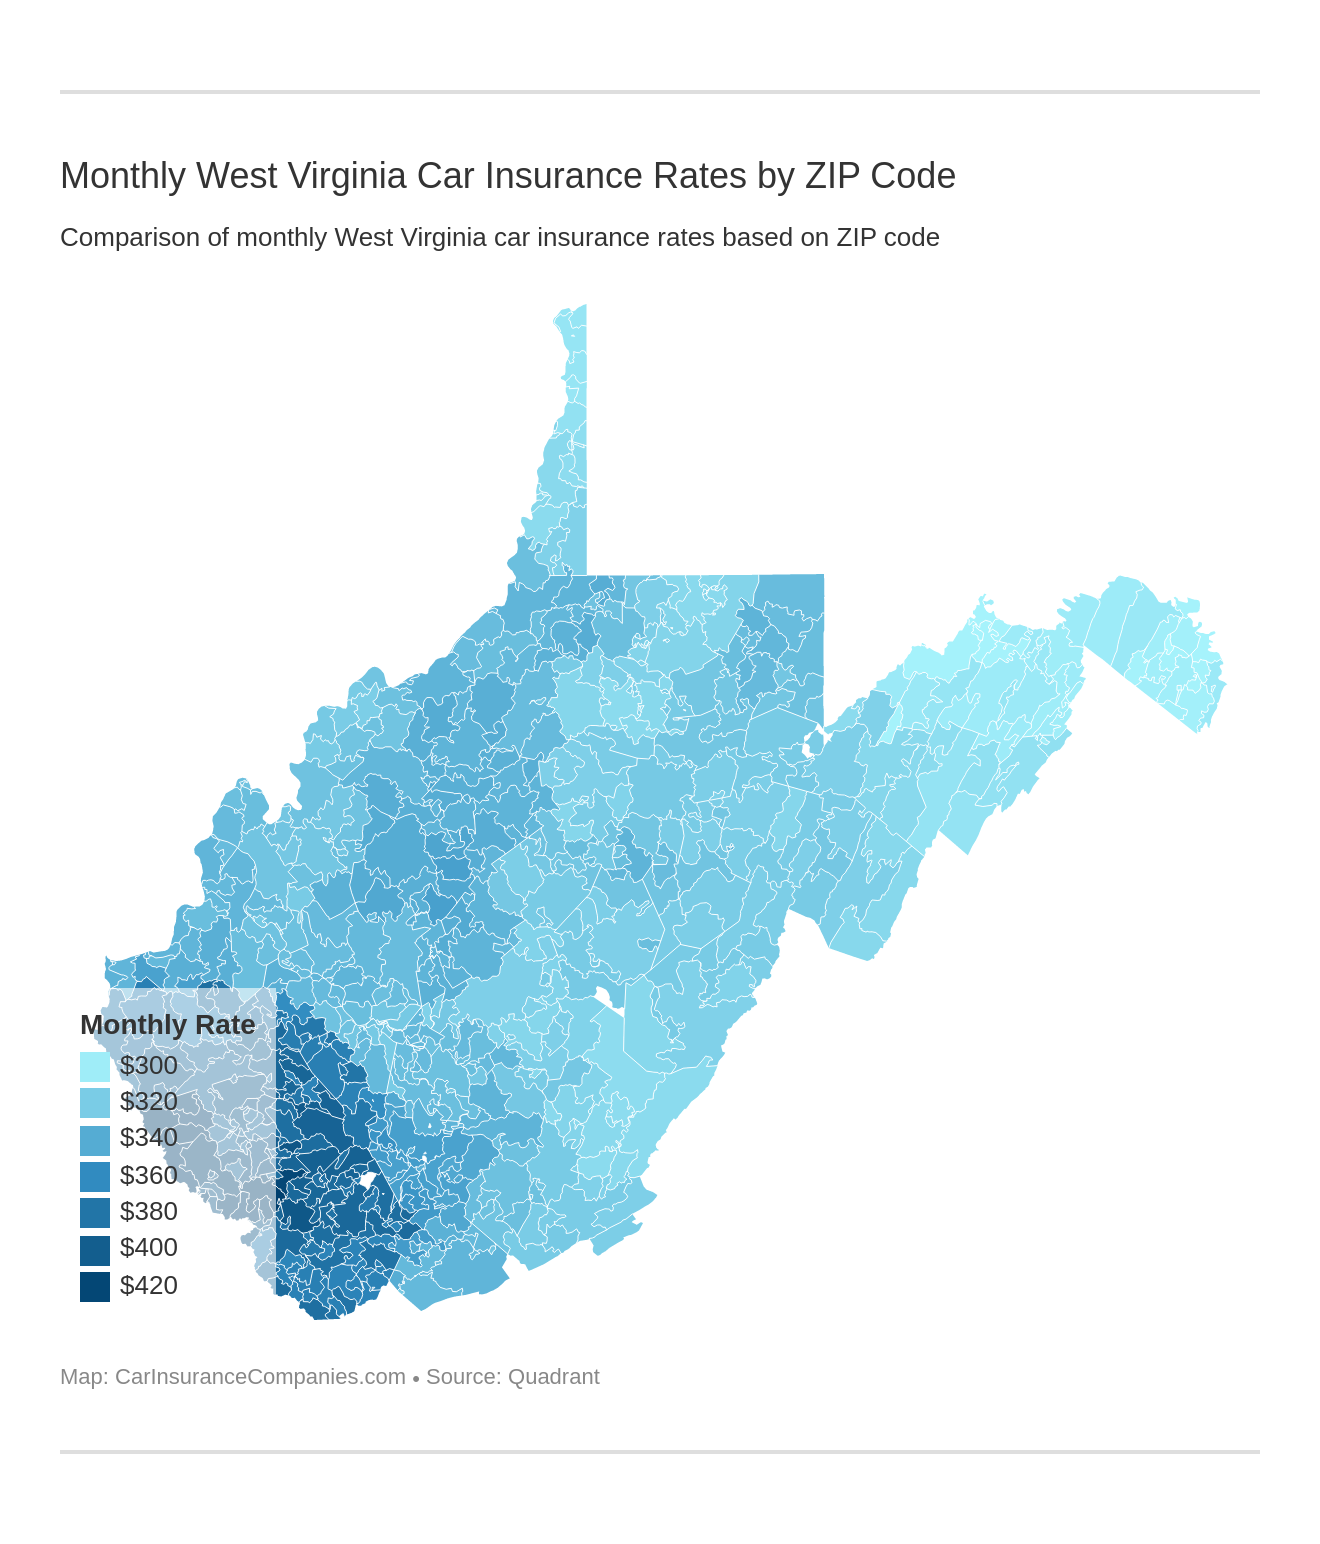 Monthly West Virginia Car Insurance Rates by ZIP Code